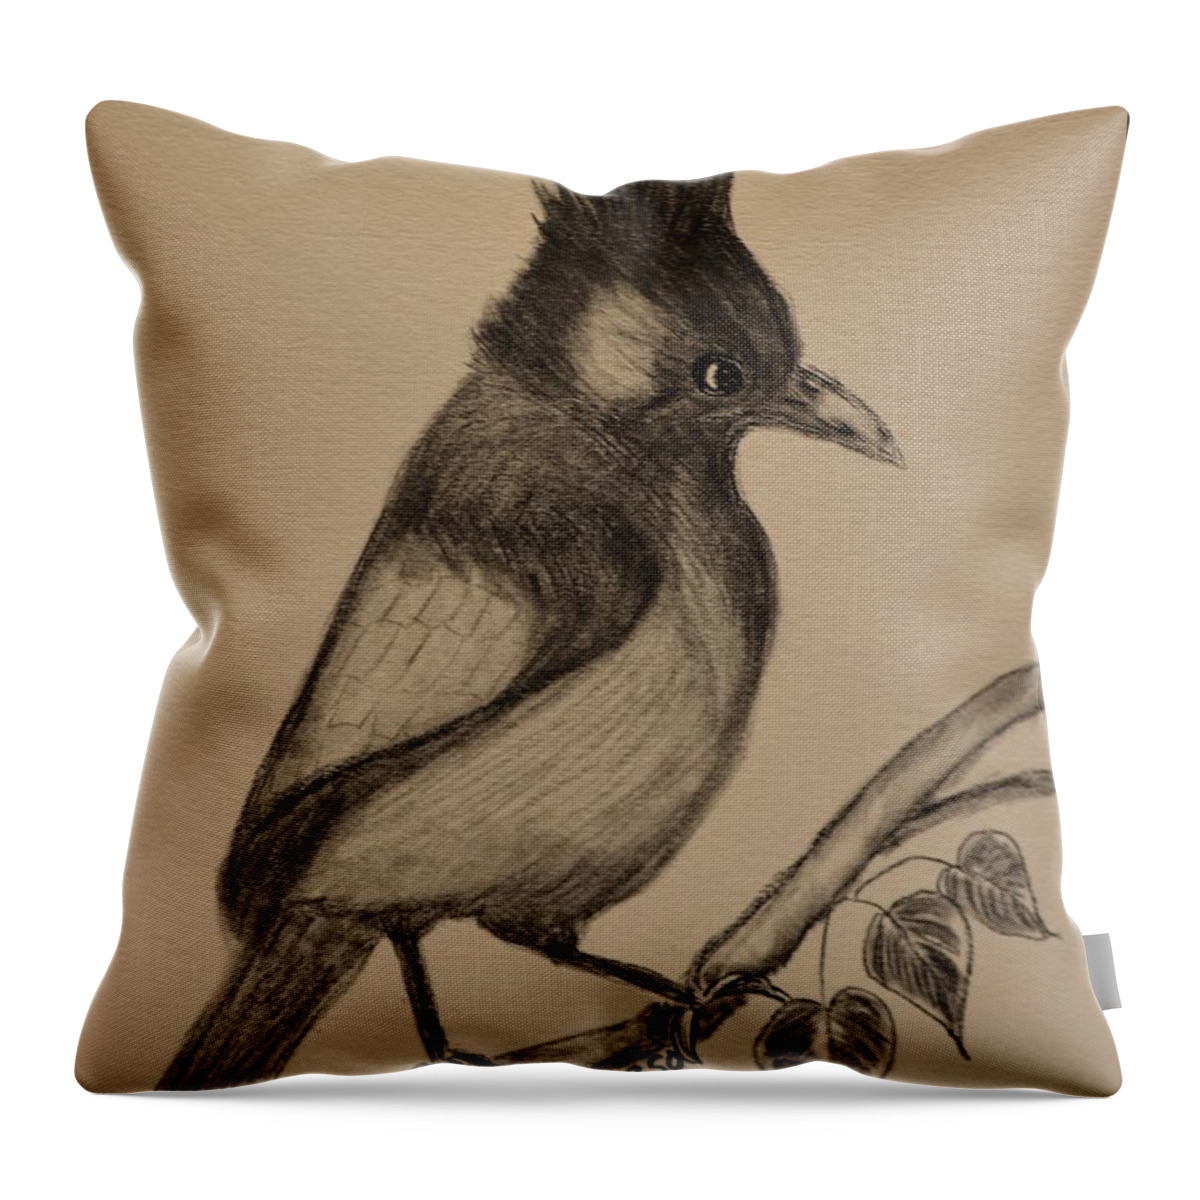 Stellar's Jay - Charcoal Throw Pillow featuring the drawing Stellar's Jay - Charcoal by Maria Urso